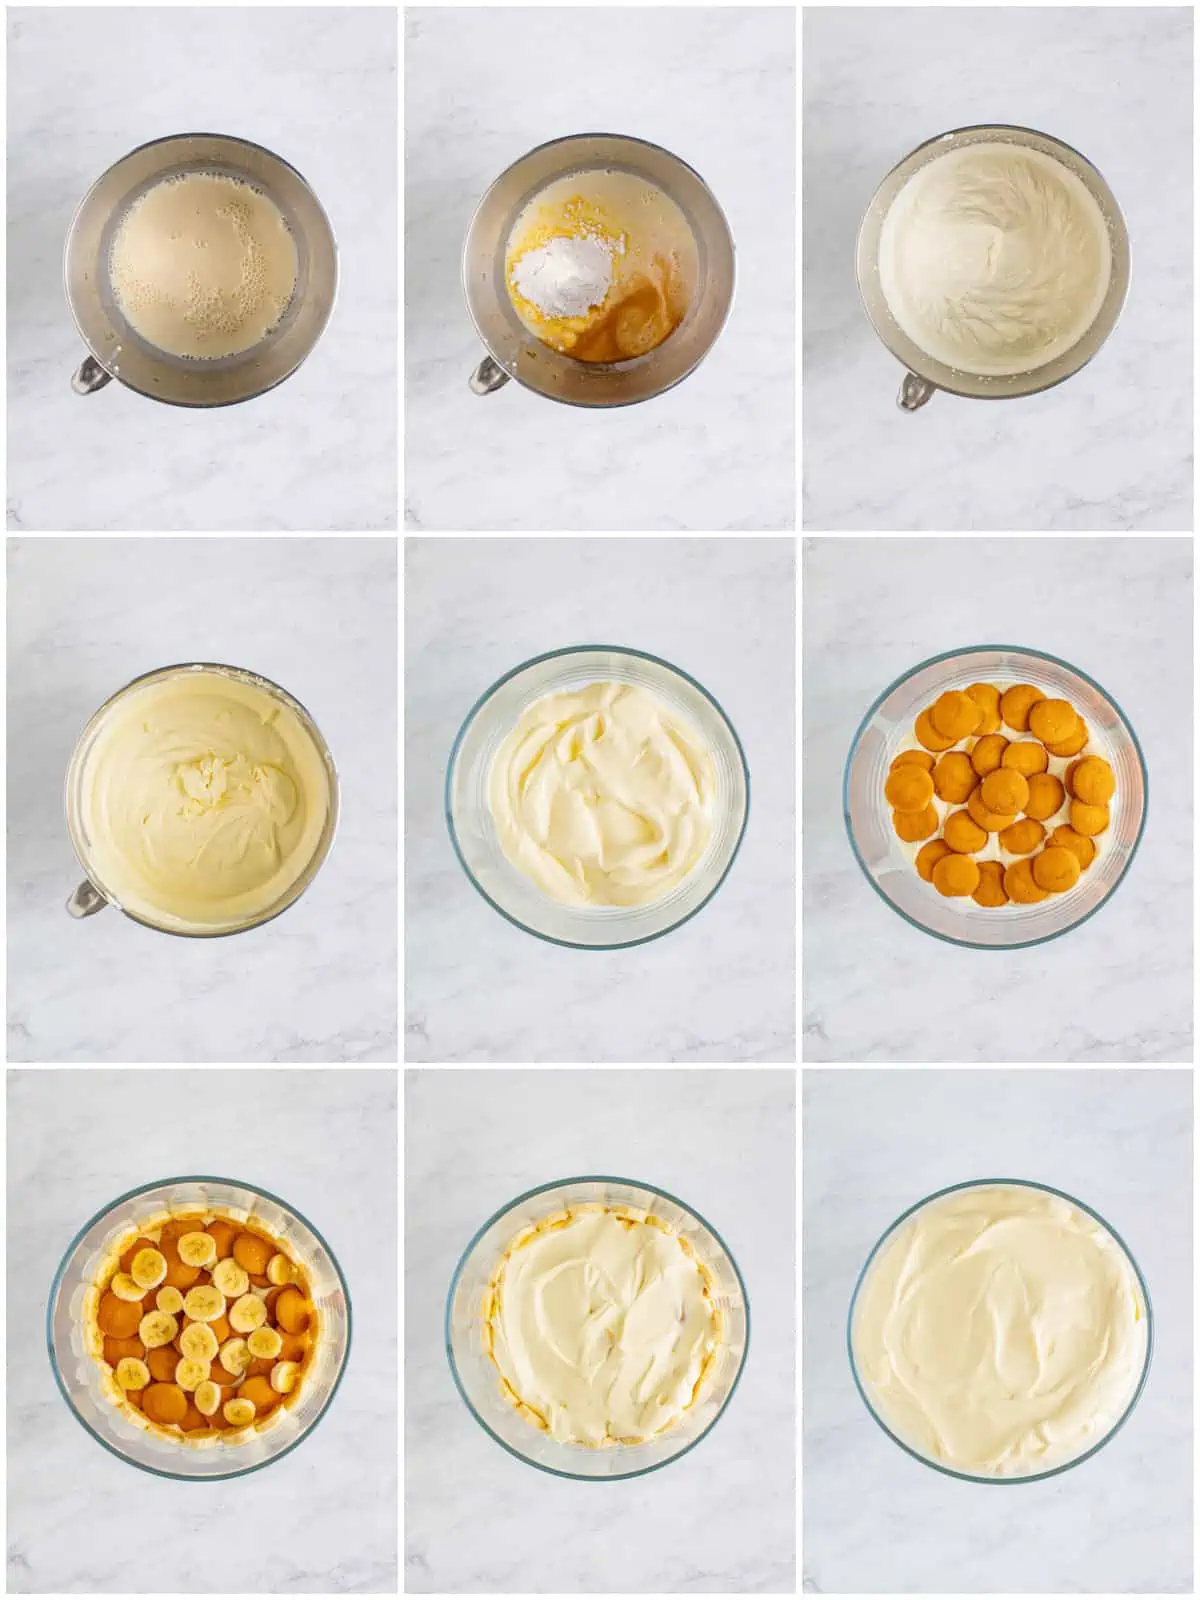 Step by step photos on how to make Magnolia Banana Pudding